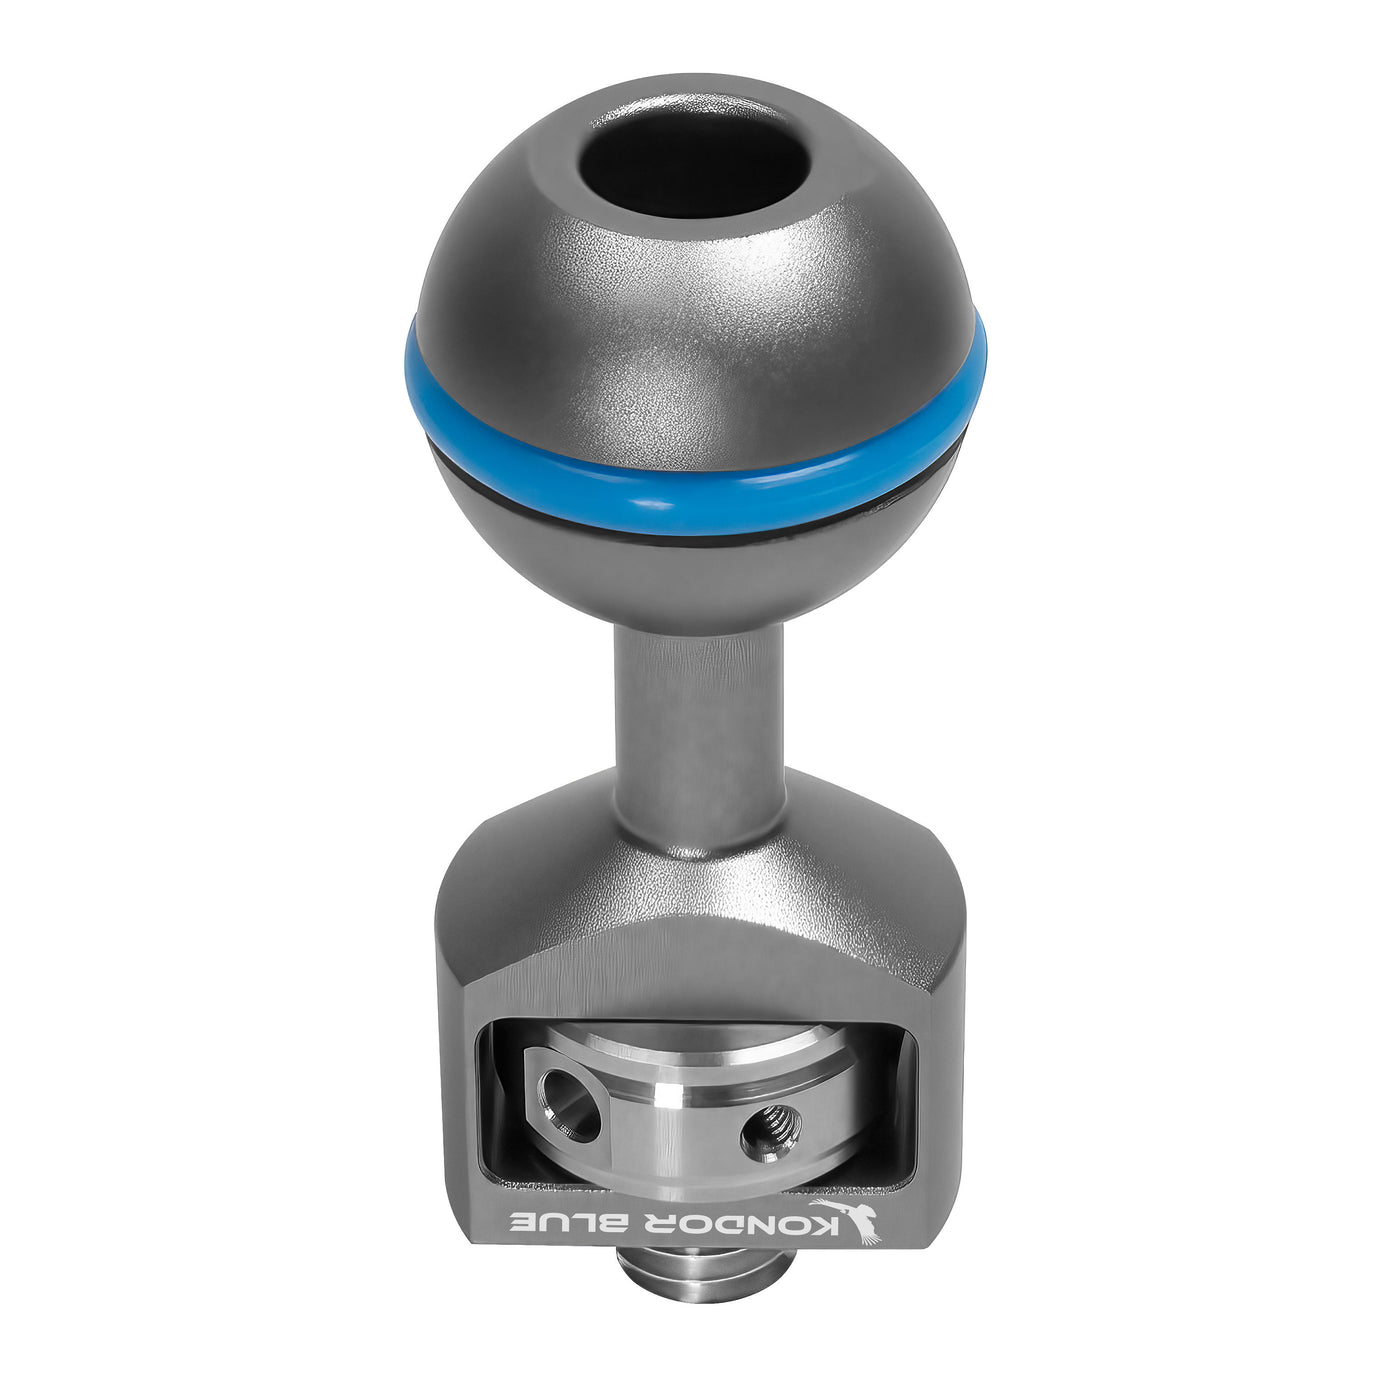 3/8" Ball Head with Locating Pins for Magic Arms